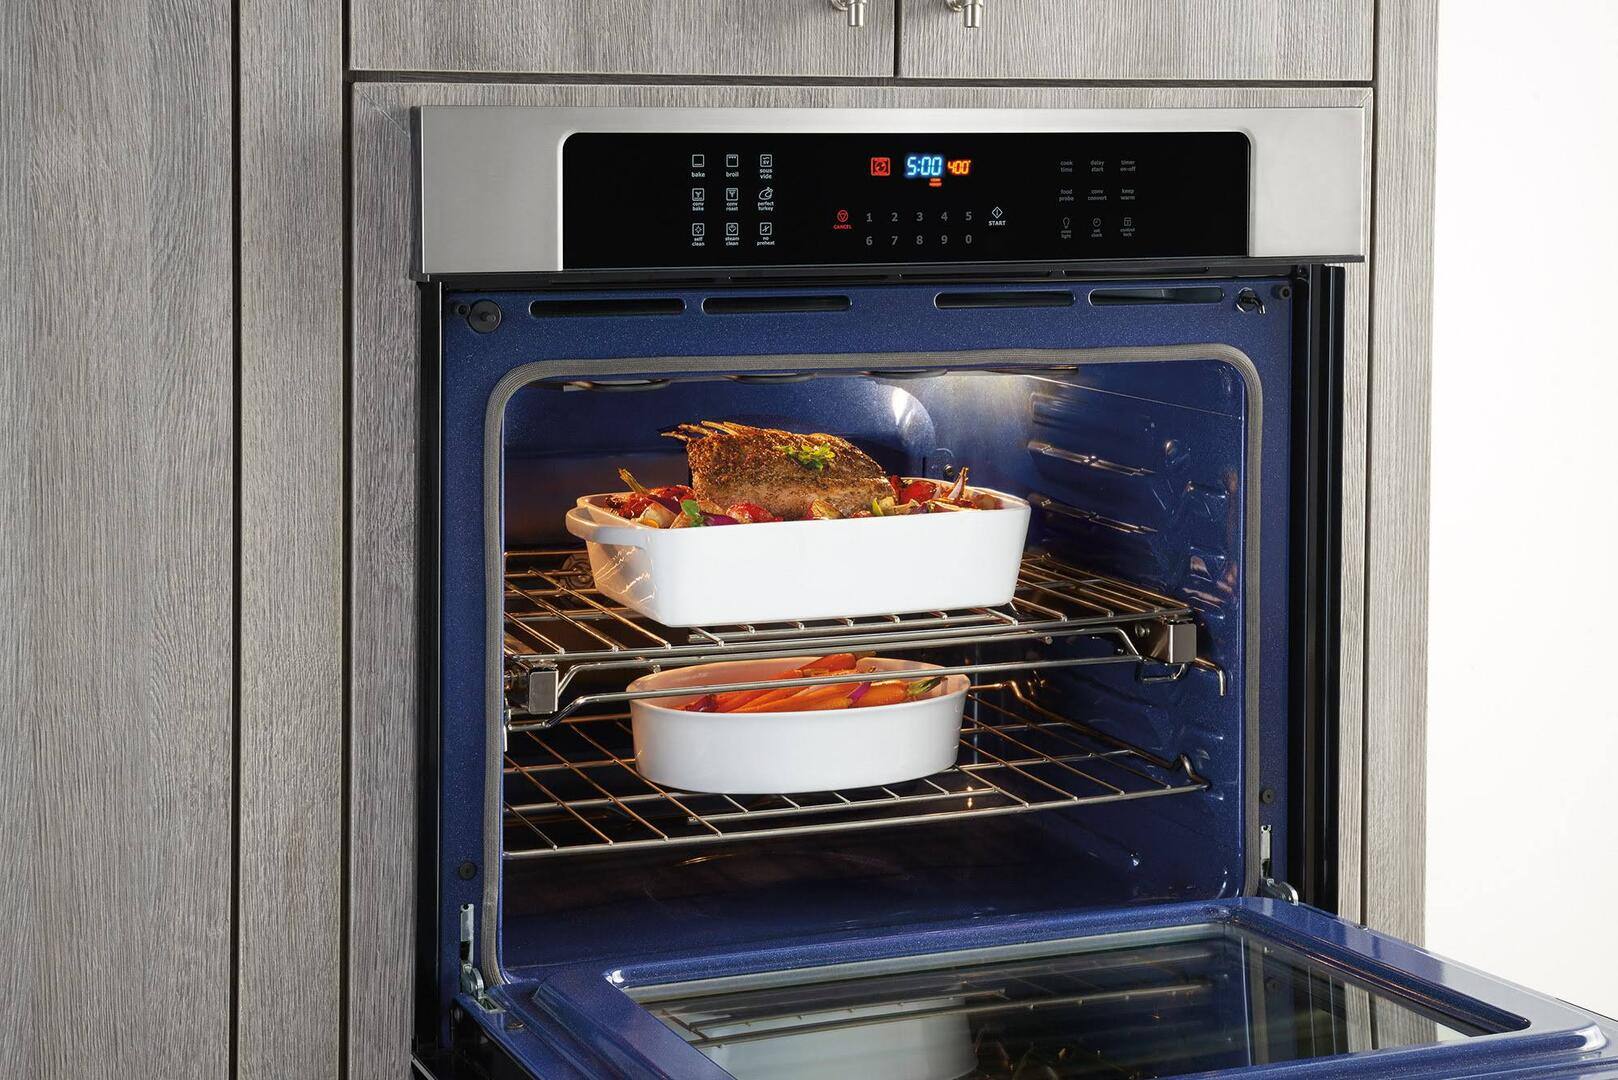 Electrolux EI30EW38TS Single Wall Oven at Appliances Connection $1099 + Free Shipping